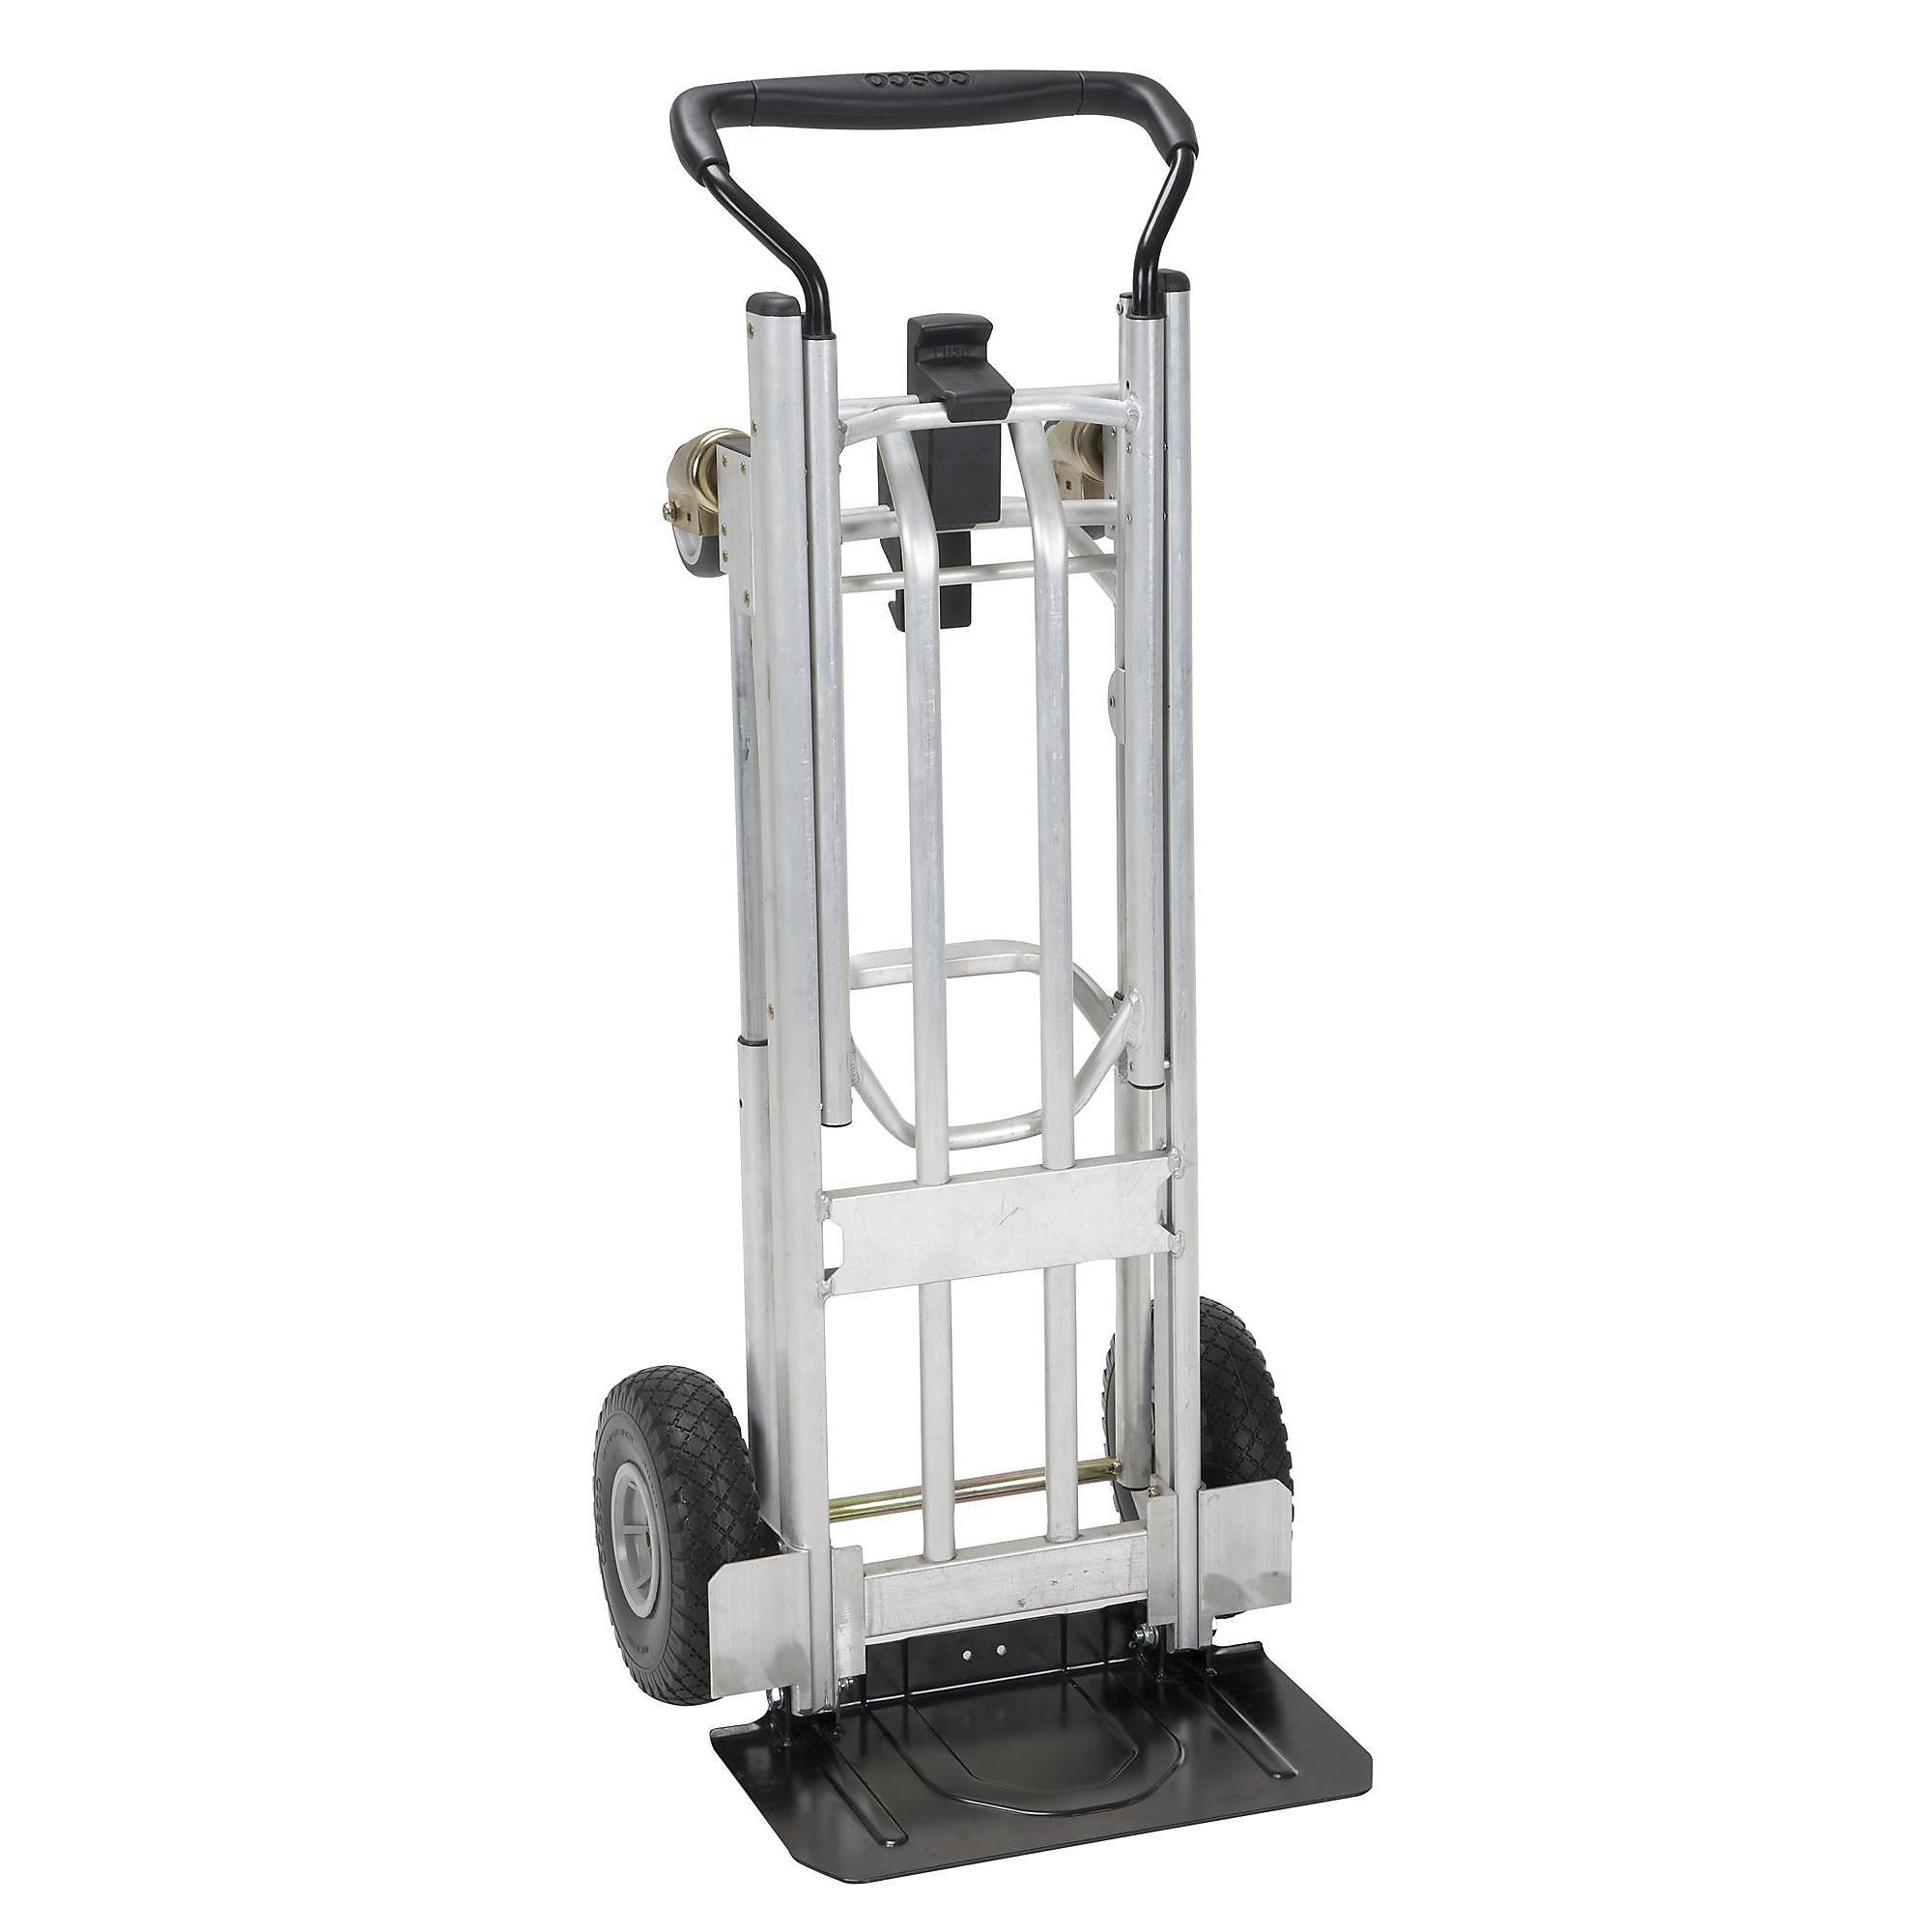 Cosco, 4Inch-1 Folding Hand Truck w/Flat-Free Wheels, Load Capacity 1000 lb, Height 29.25 in, Material Steel, Model 12323ASB1E